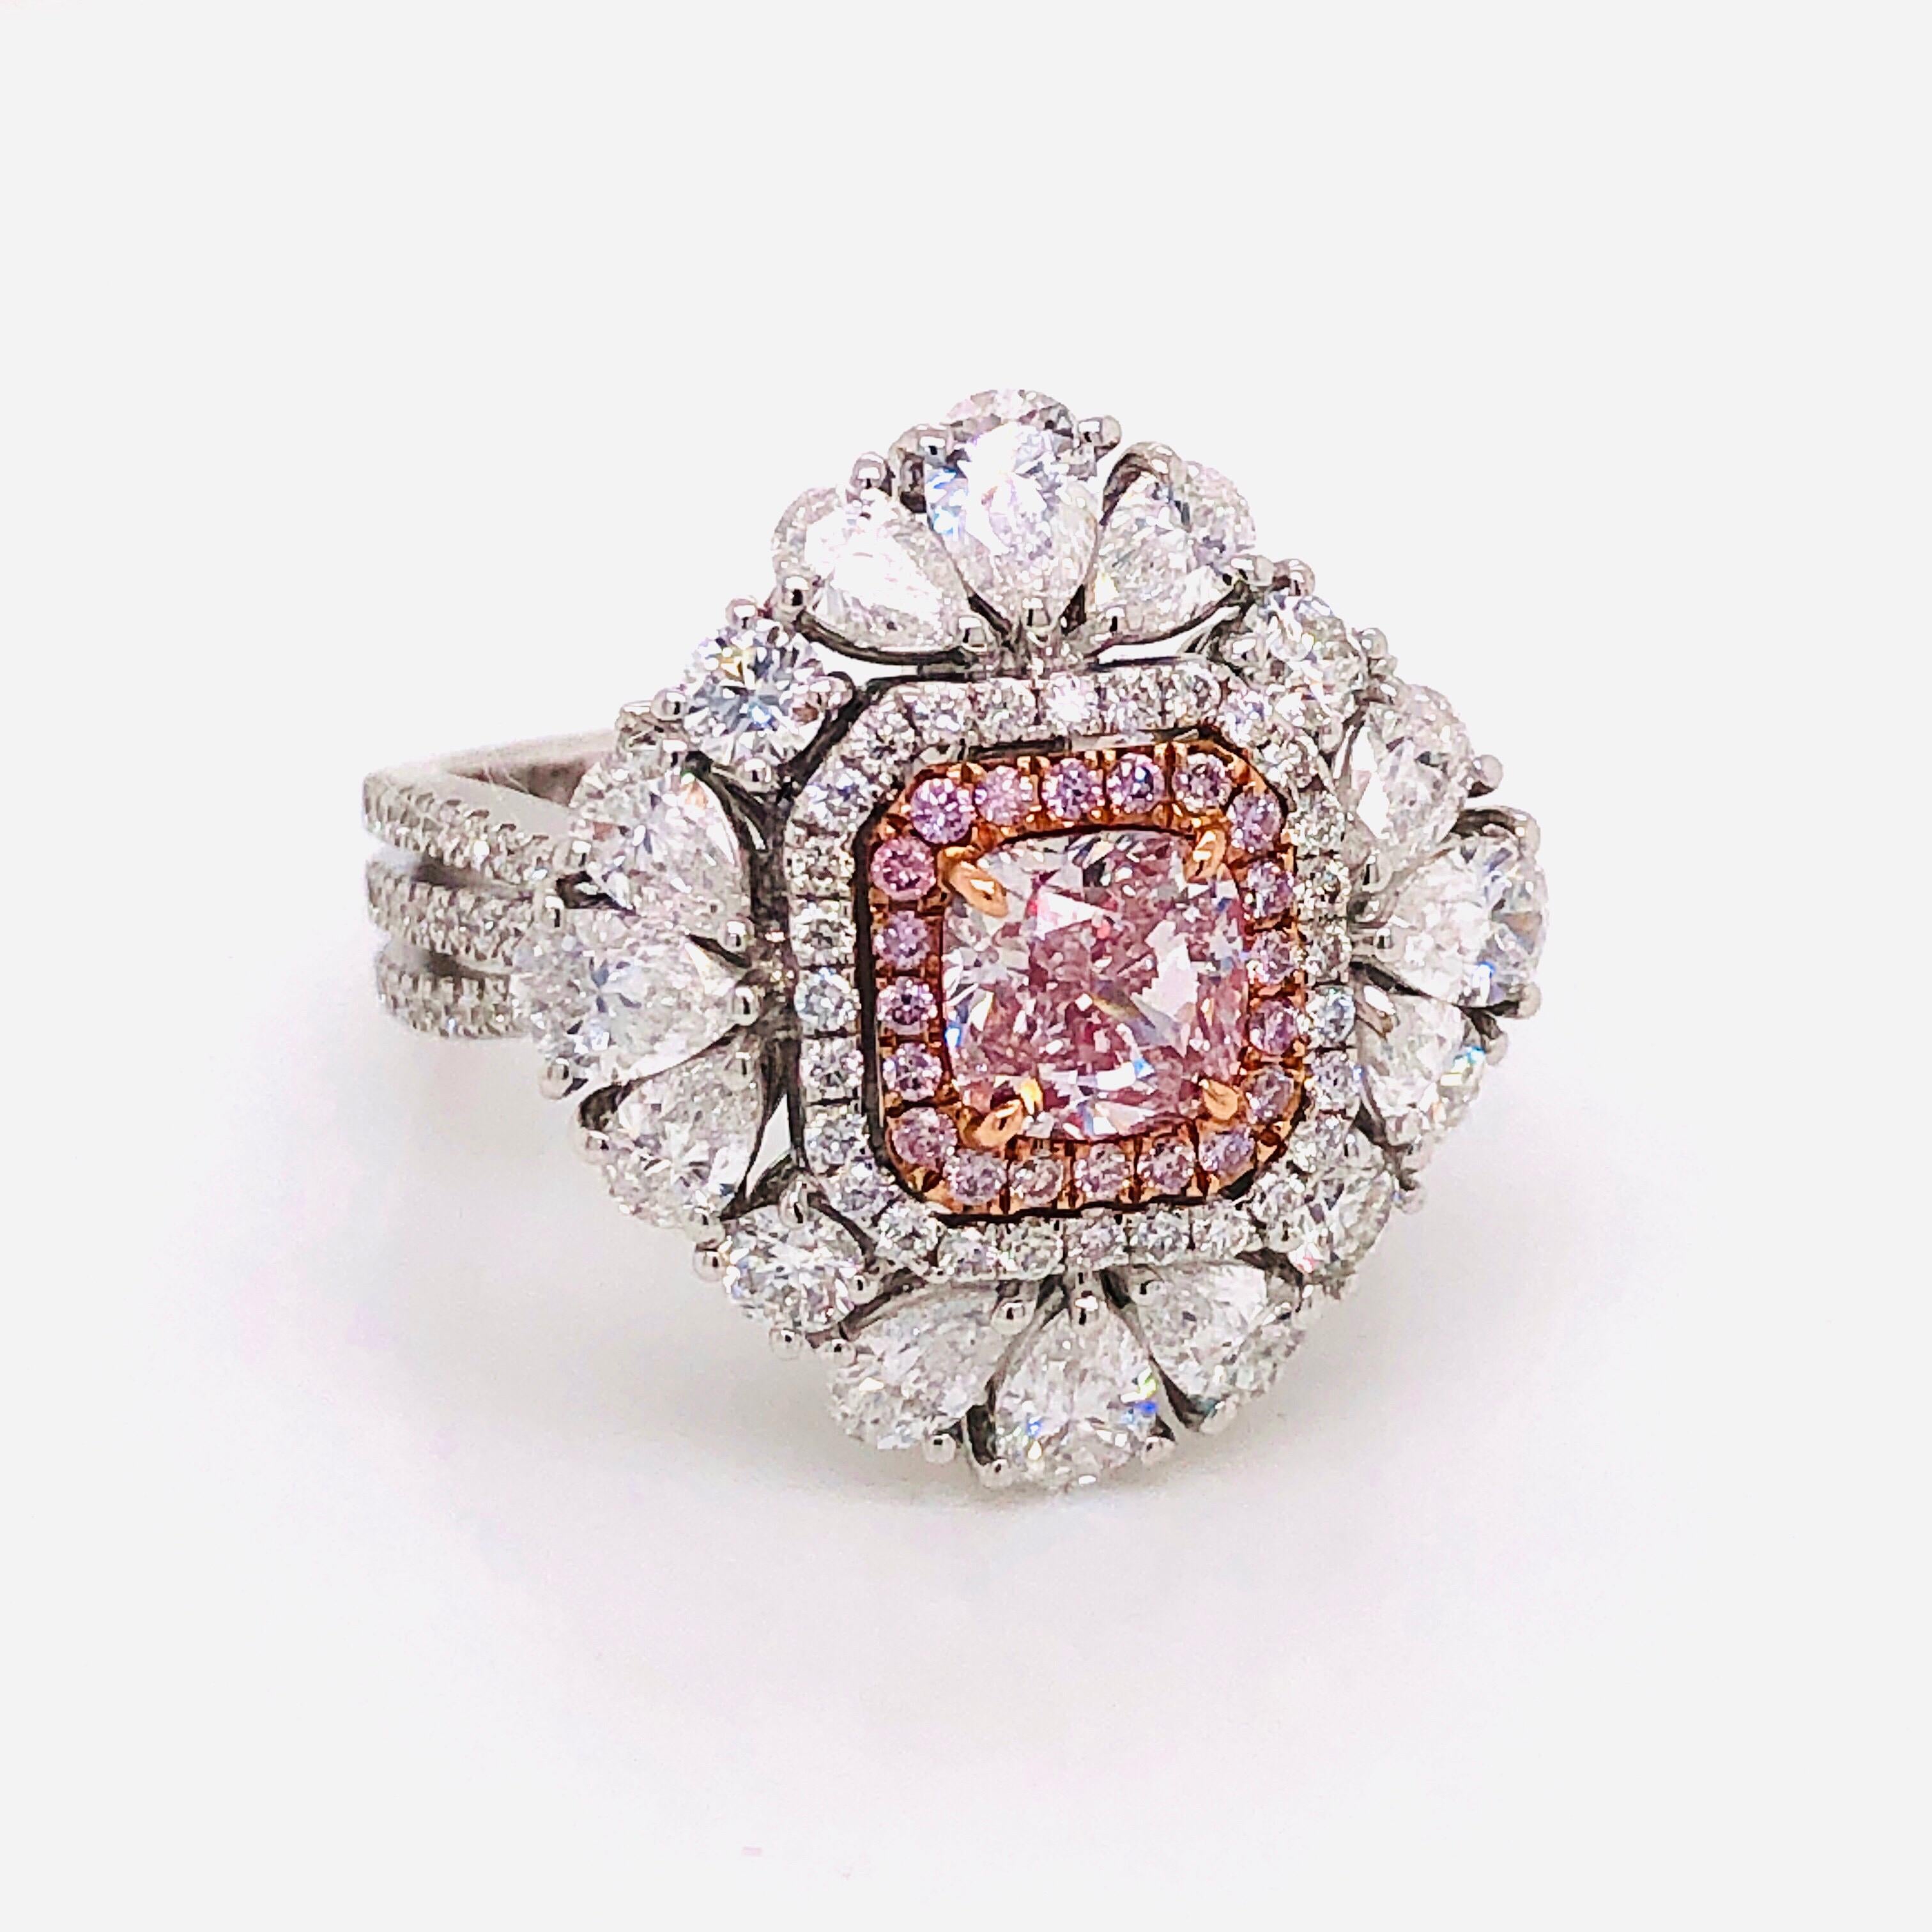 Hand made in the Emilio Atelier Showcasing a spectacular GIA certified 1.01ct Natural Fancy F. Pink with excellent saturation throughout. The clarity is Vs2. Please send us a message to request a copy of the GIA report. This design features a